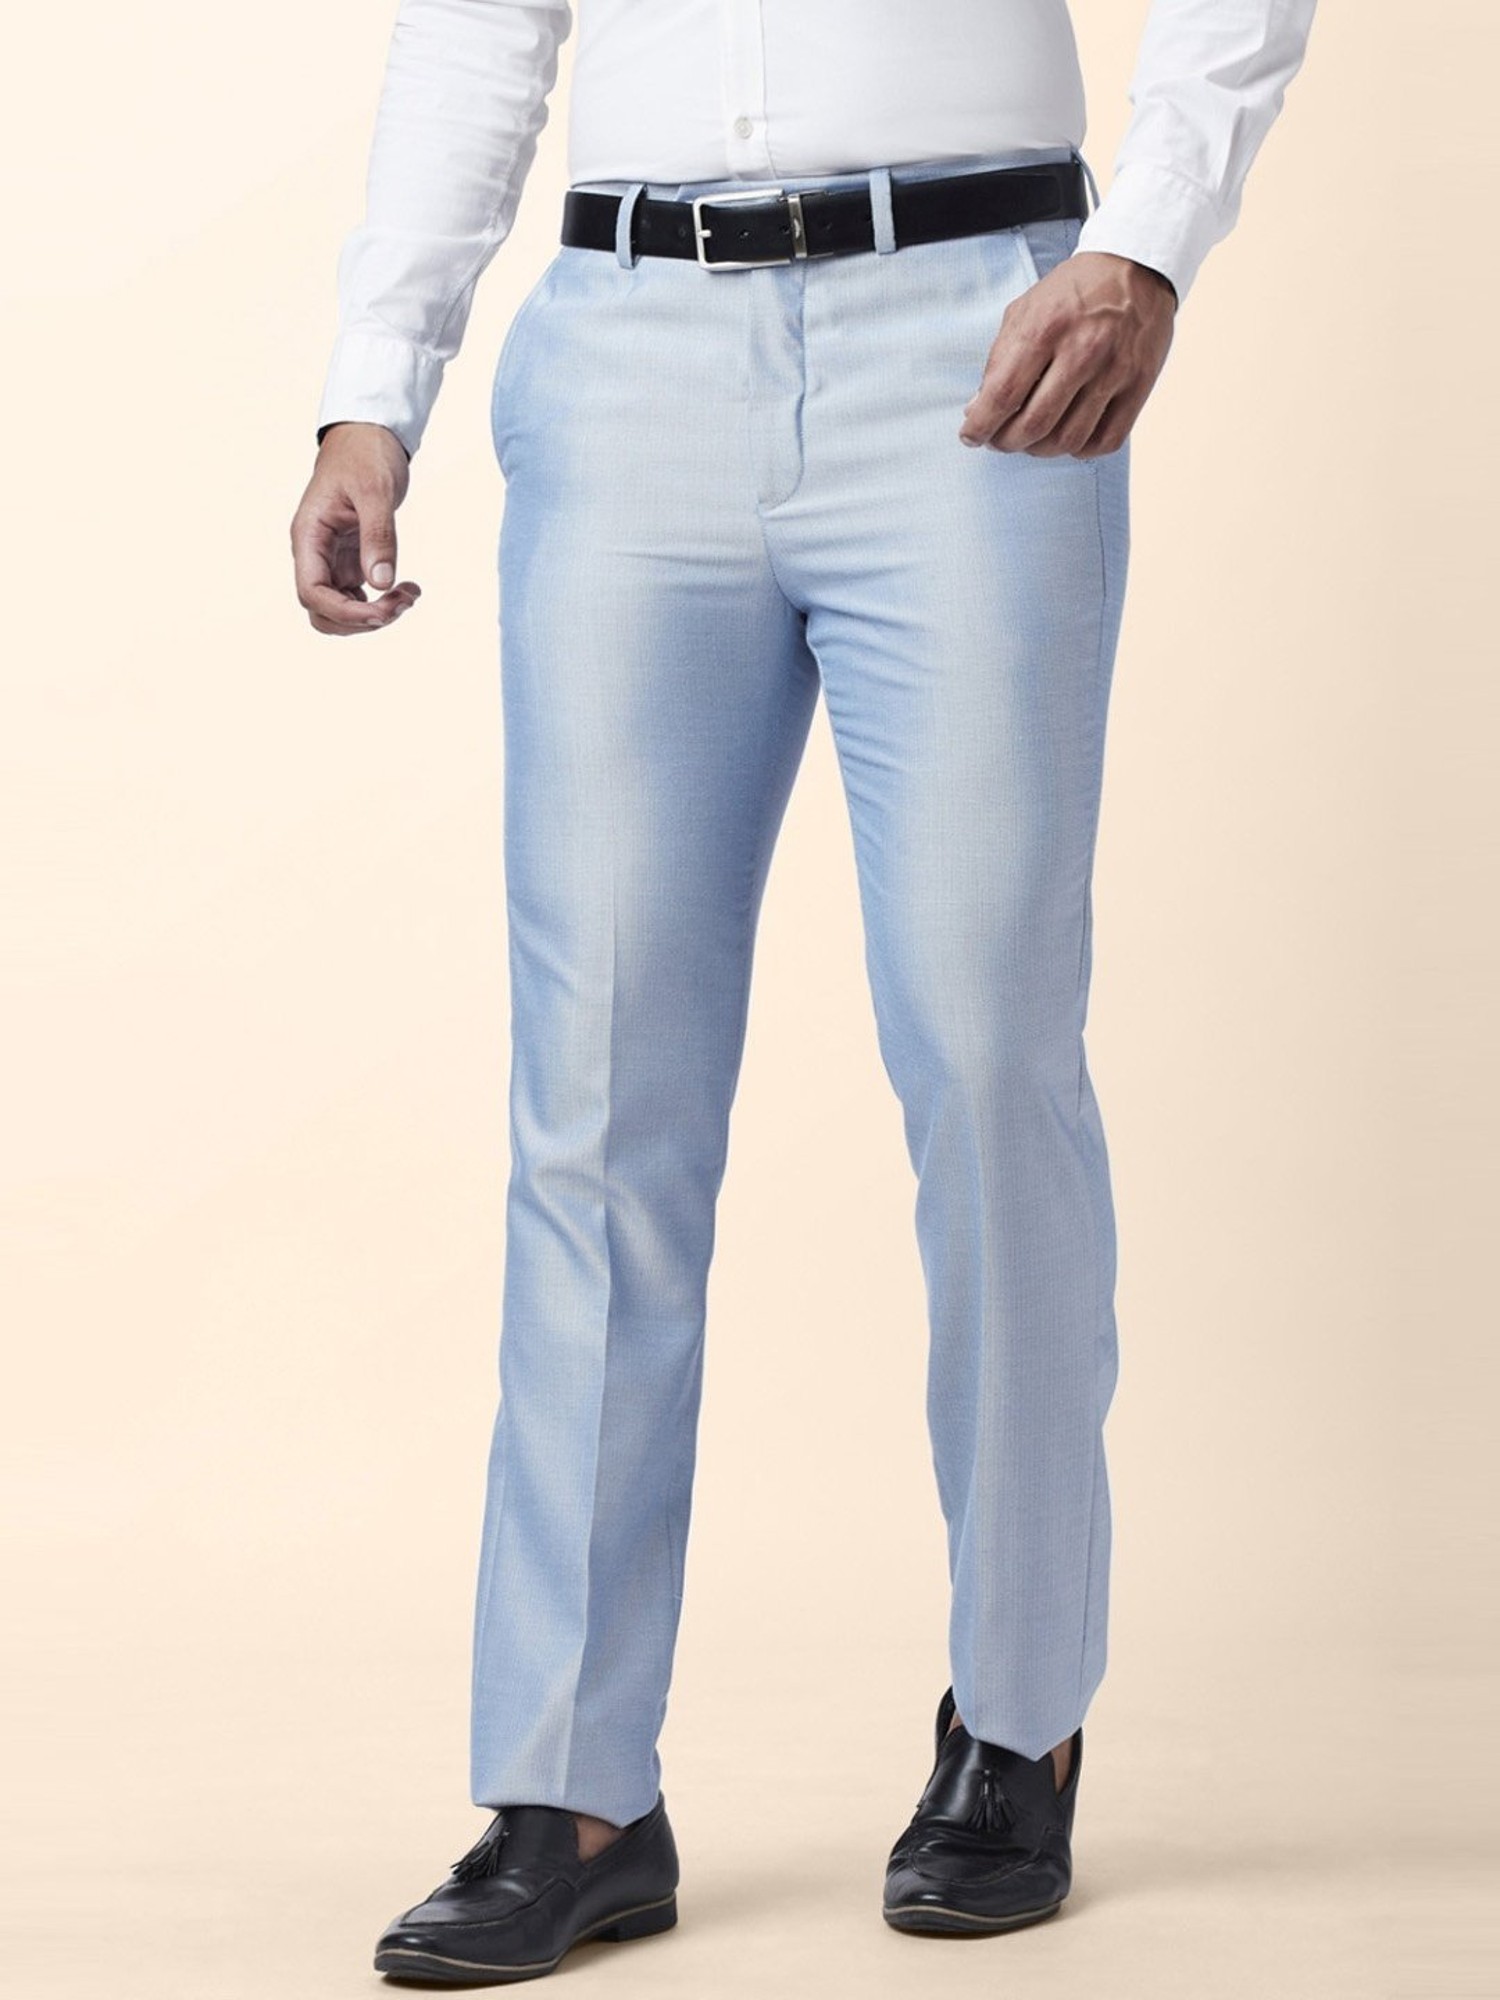 7 Types of Pants Every Man Should Own in 2023 3 to Avoid